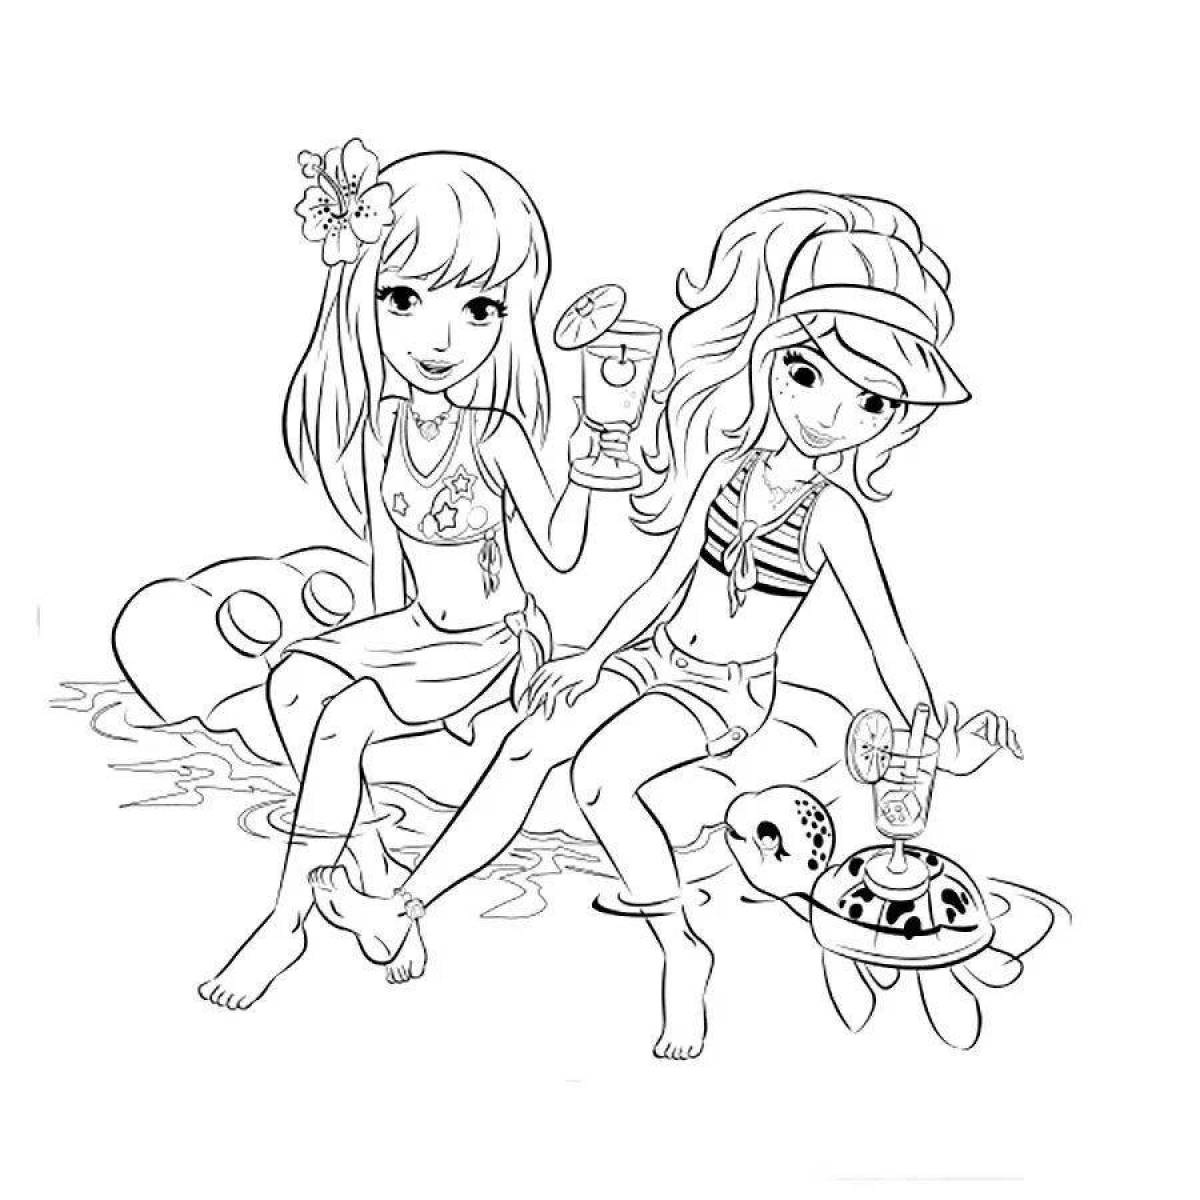 Rambul's delightful friends coloring page